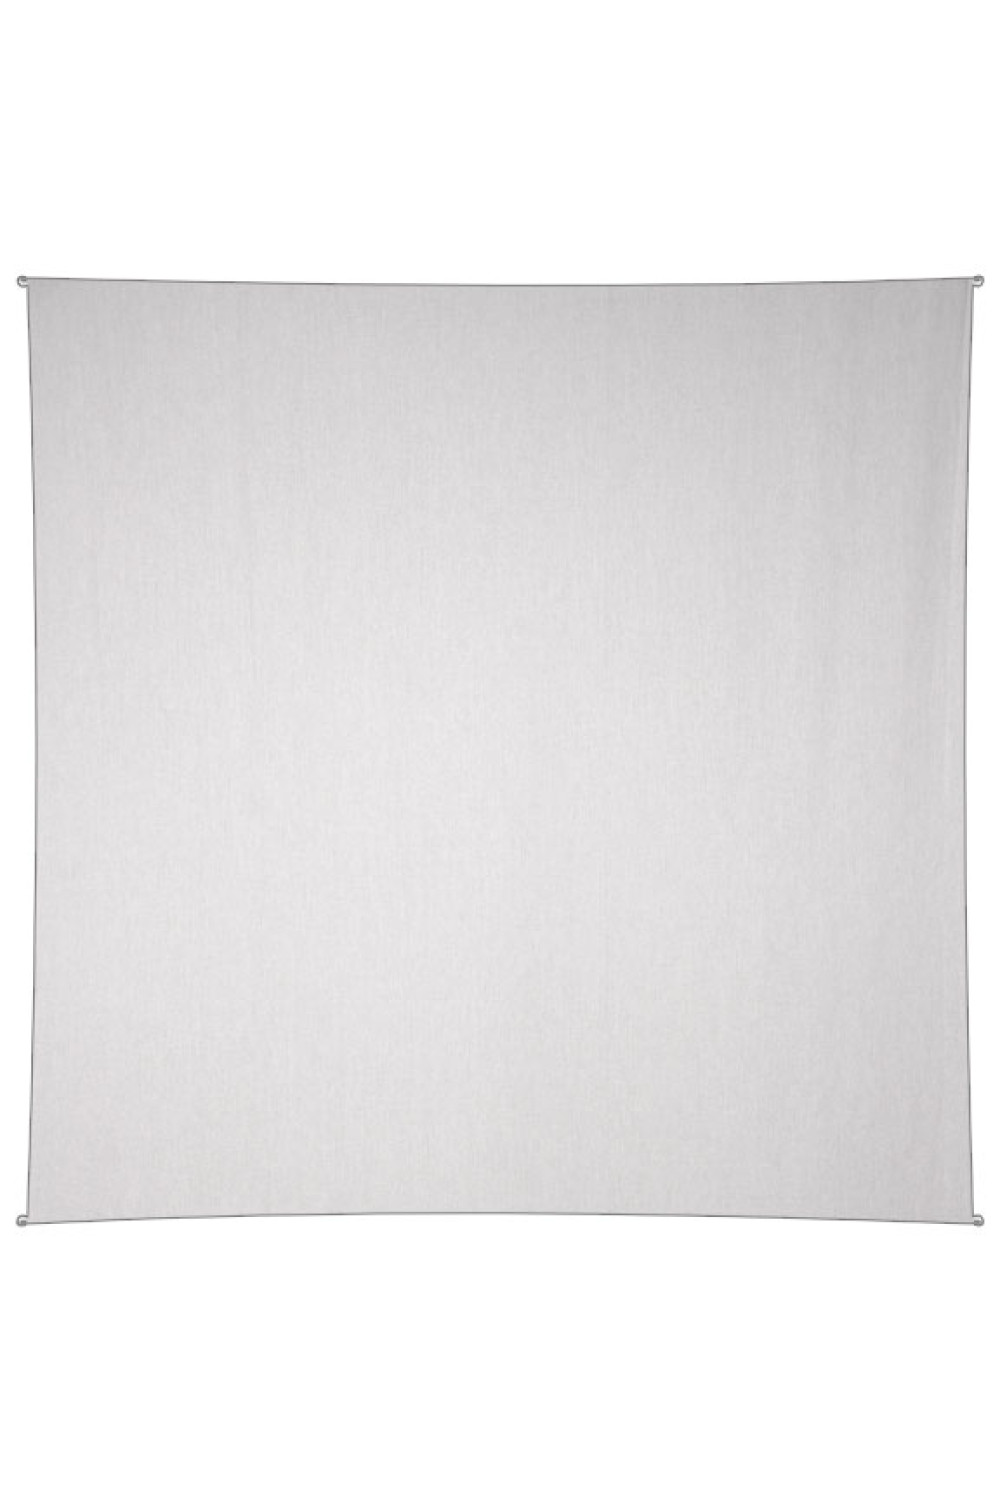 BLEMISHED 12 PC LOT Blank White Tapestry 58x58 100% Cotton - SAVE 20%